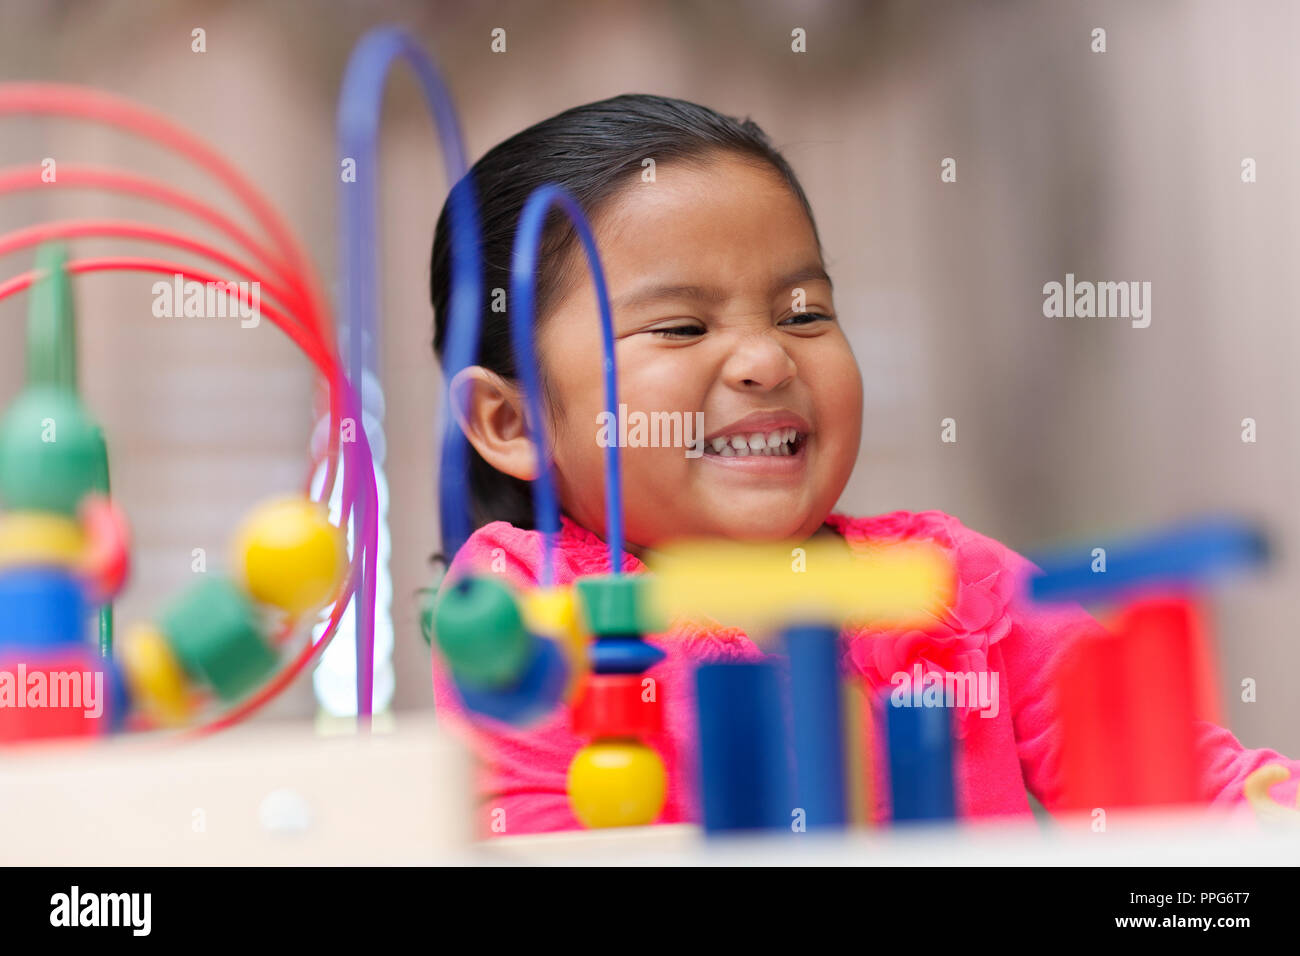 Happy latino girl playing with colorful learning toys to increase motor skills Stock Photo